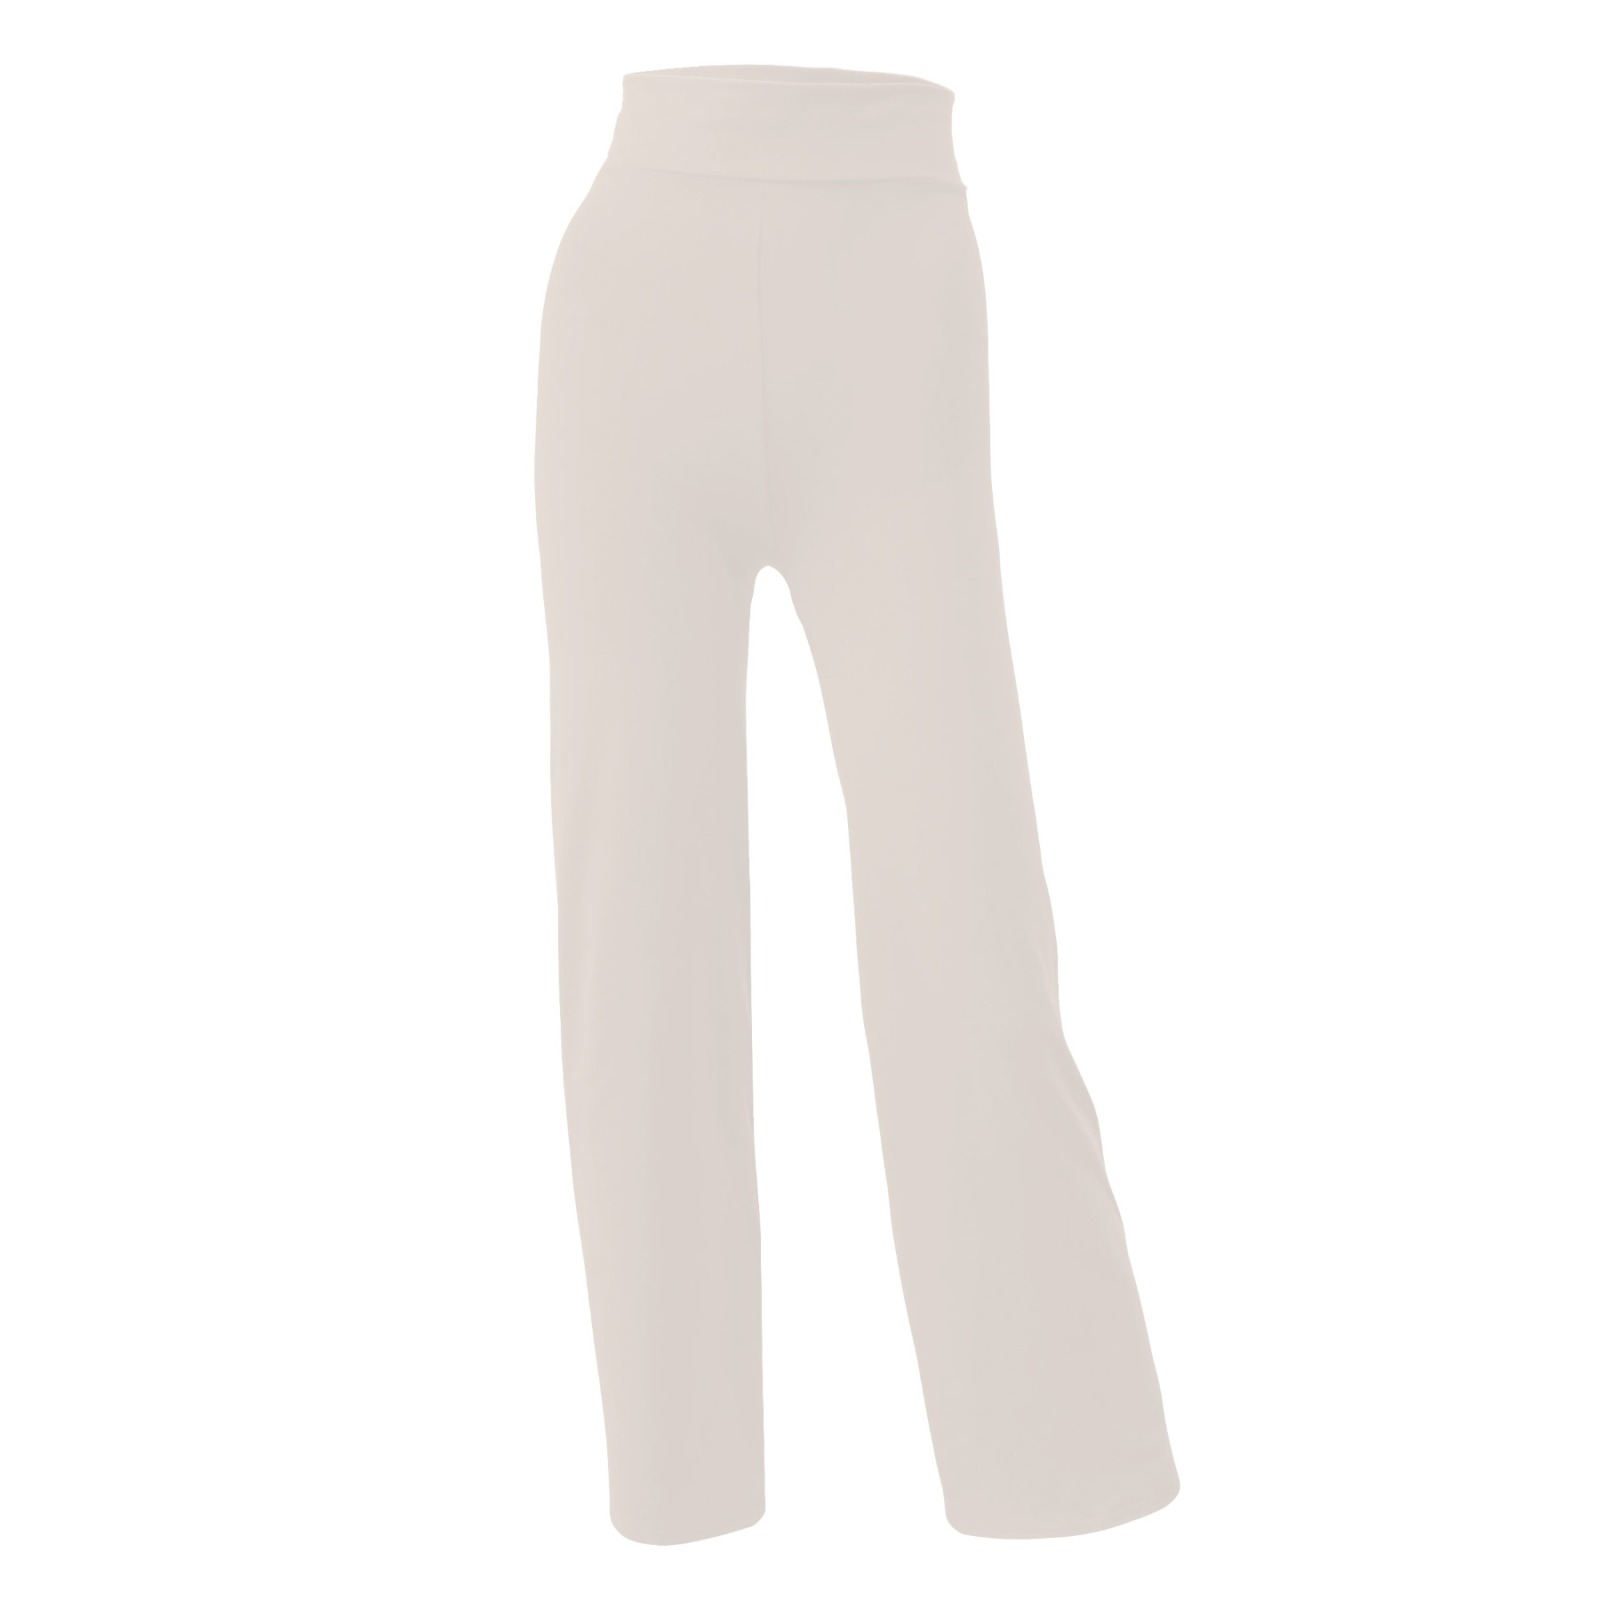 Yoga pants Relaxed Fit ecru (natural white), Online Shop